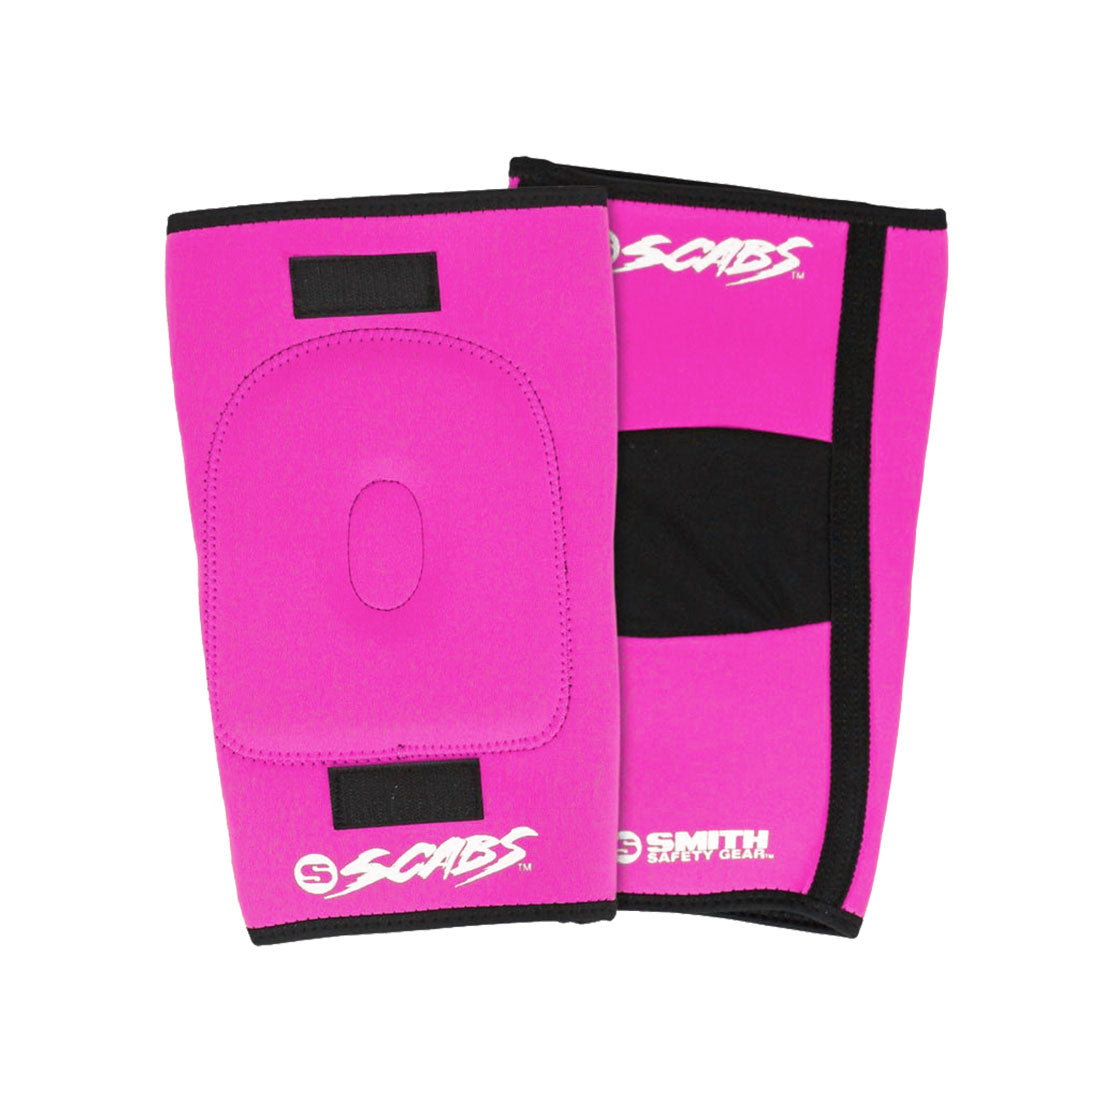 Smith Scabs Knee Gasket - Coloured Pink Protective Gear